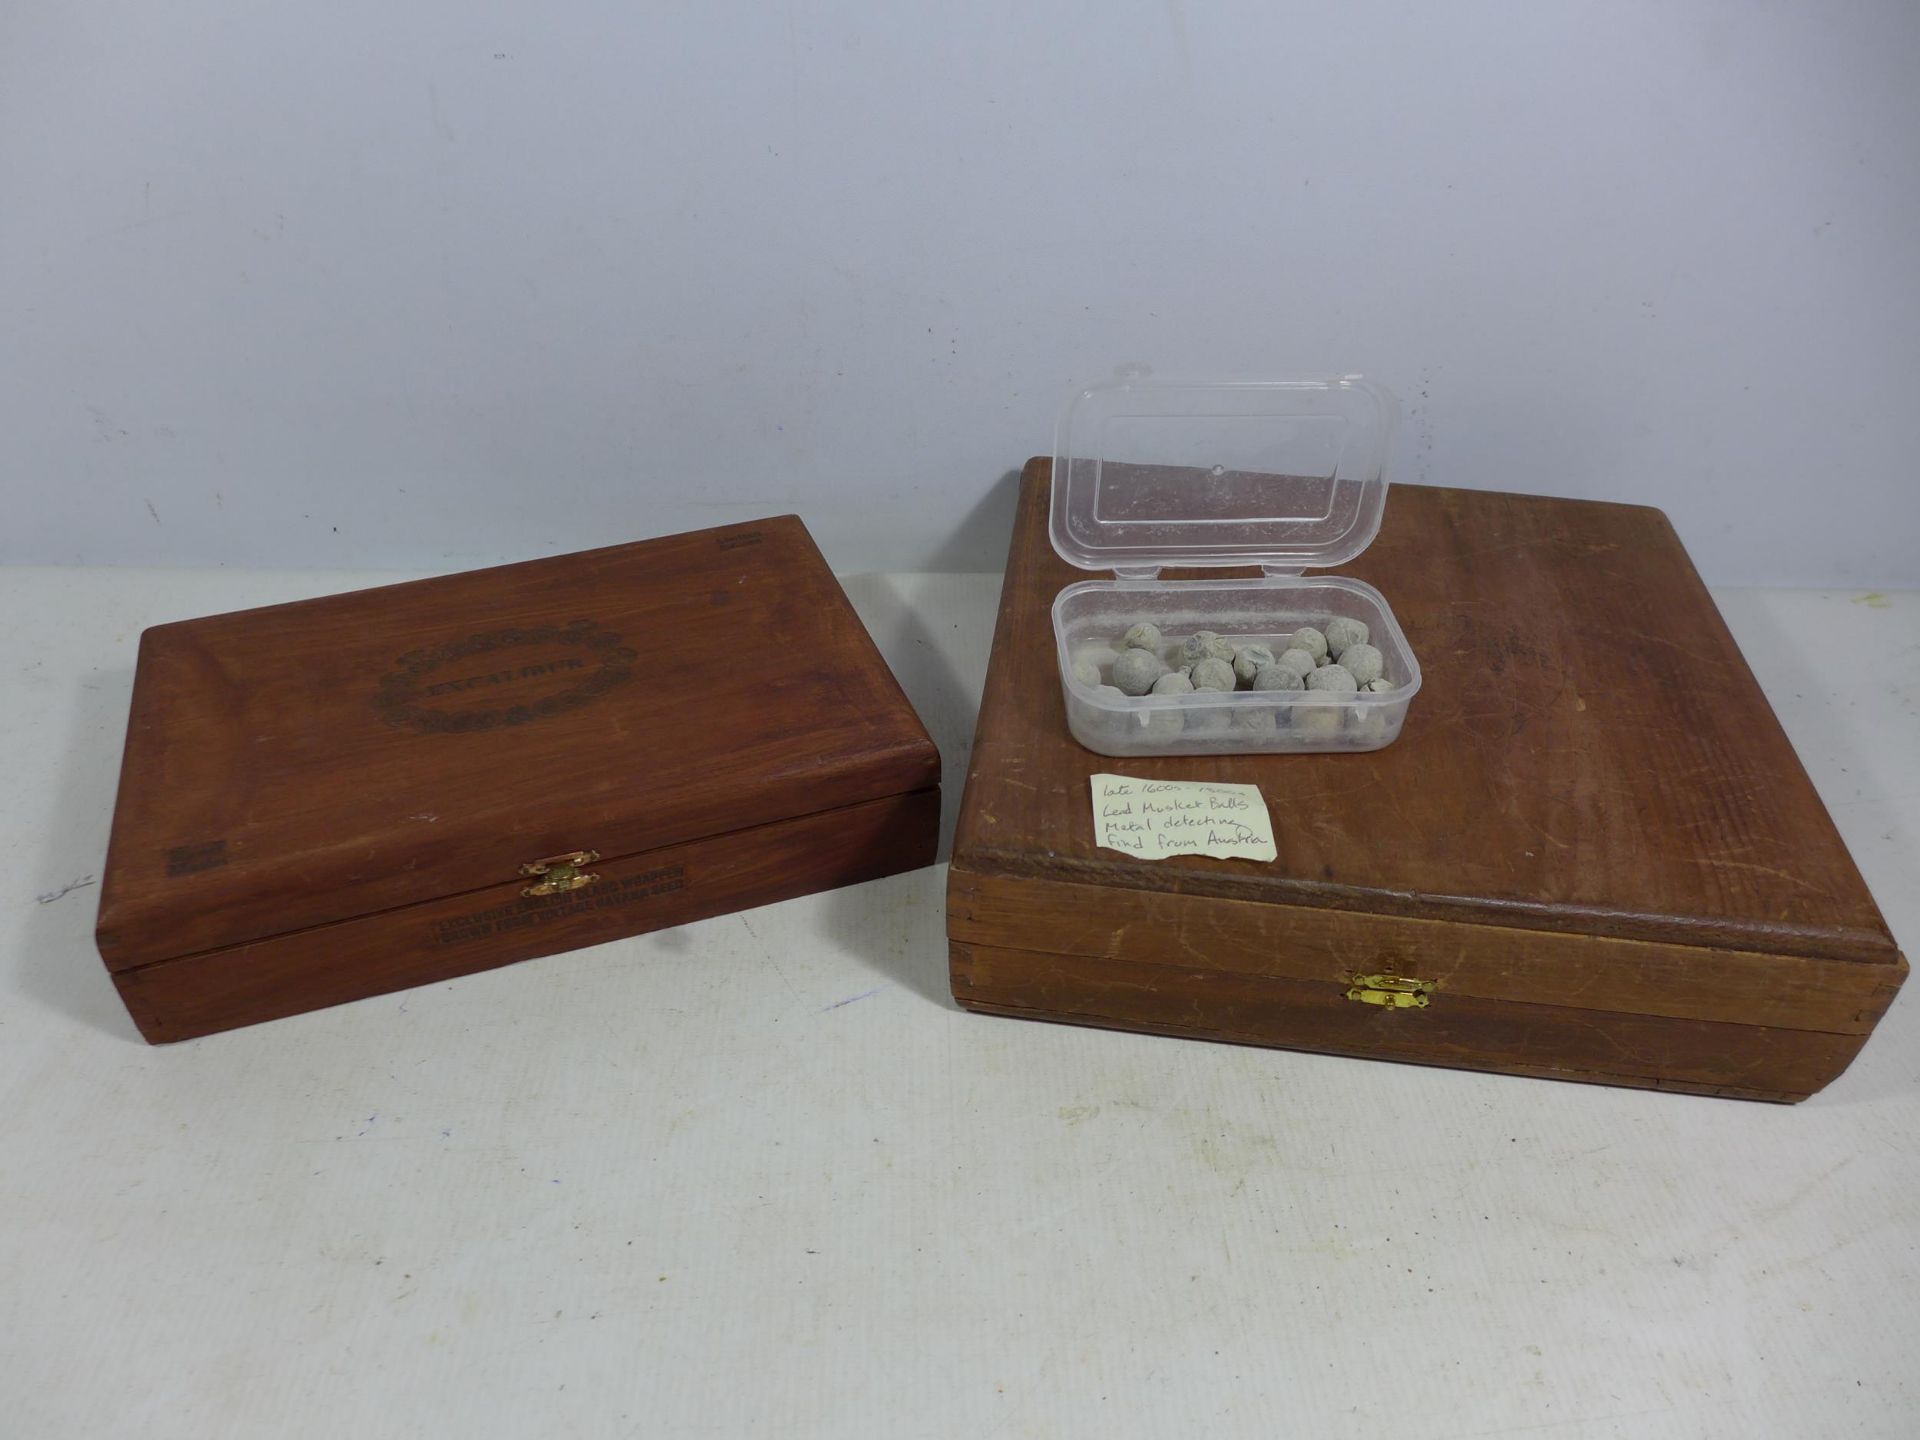 A BOX OF 17TH AND 19TH CENTURY LEAD MUSKET BALLS, TWO WOODEN BOXES